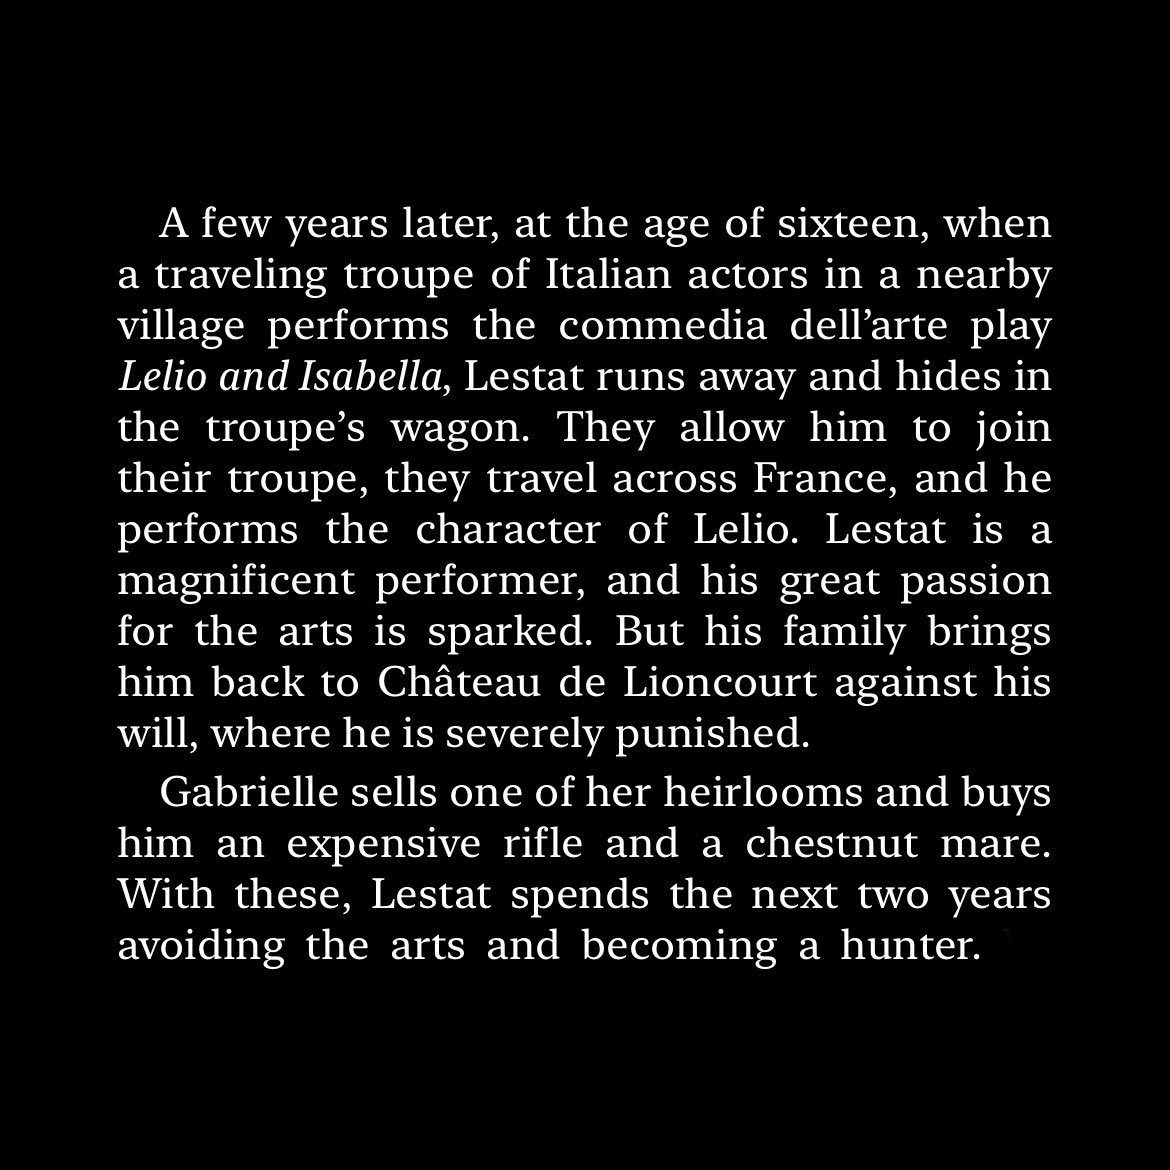 104. lestat became a theatre actor at the age of 16. this was also when he became a hunter to provide for his family.